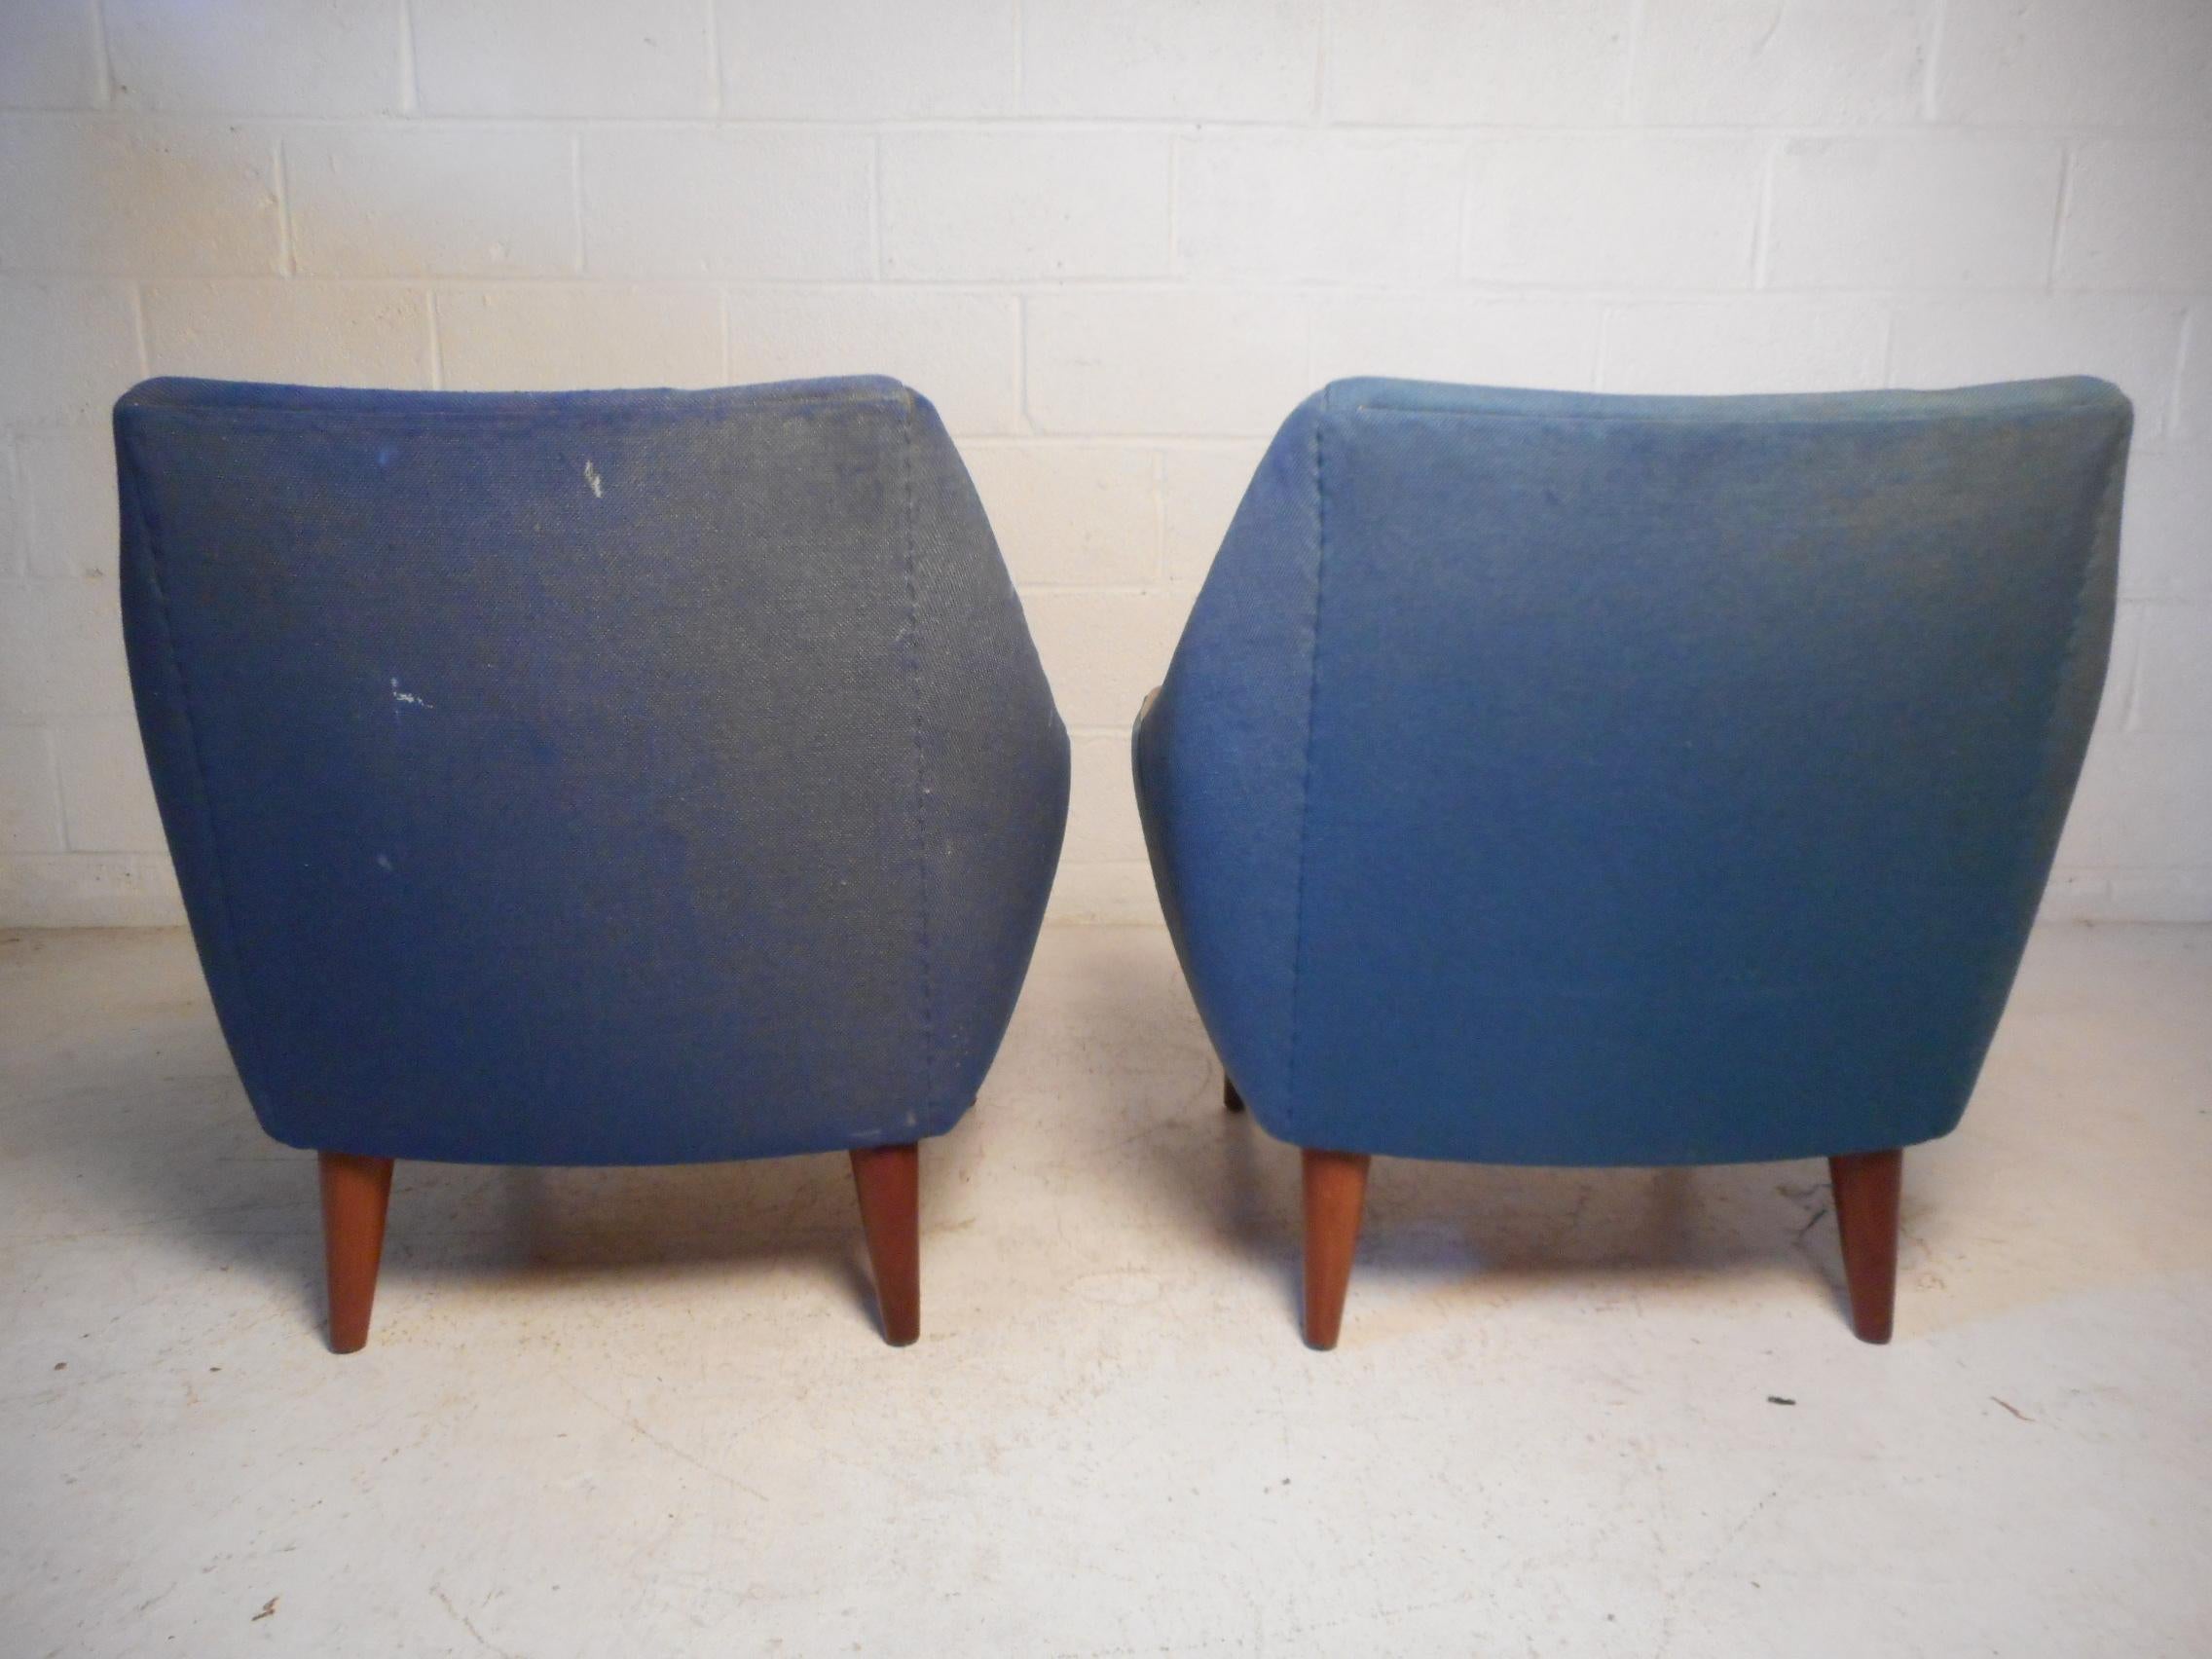 Pair of Danish Modern Lounge Chairs In Good Condition For Sale In Brooklyn, NY